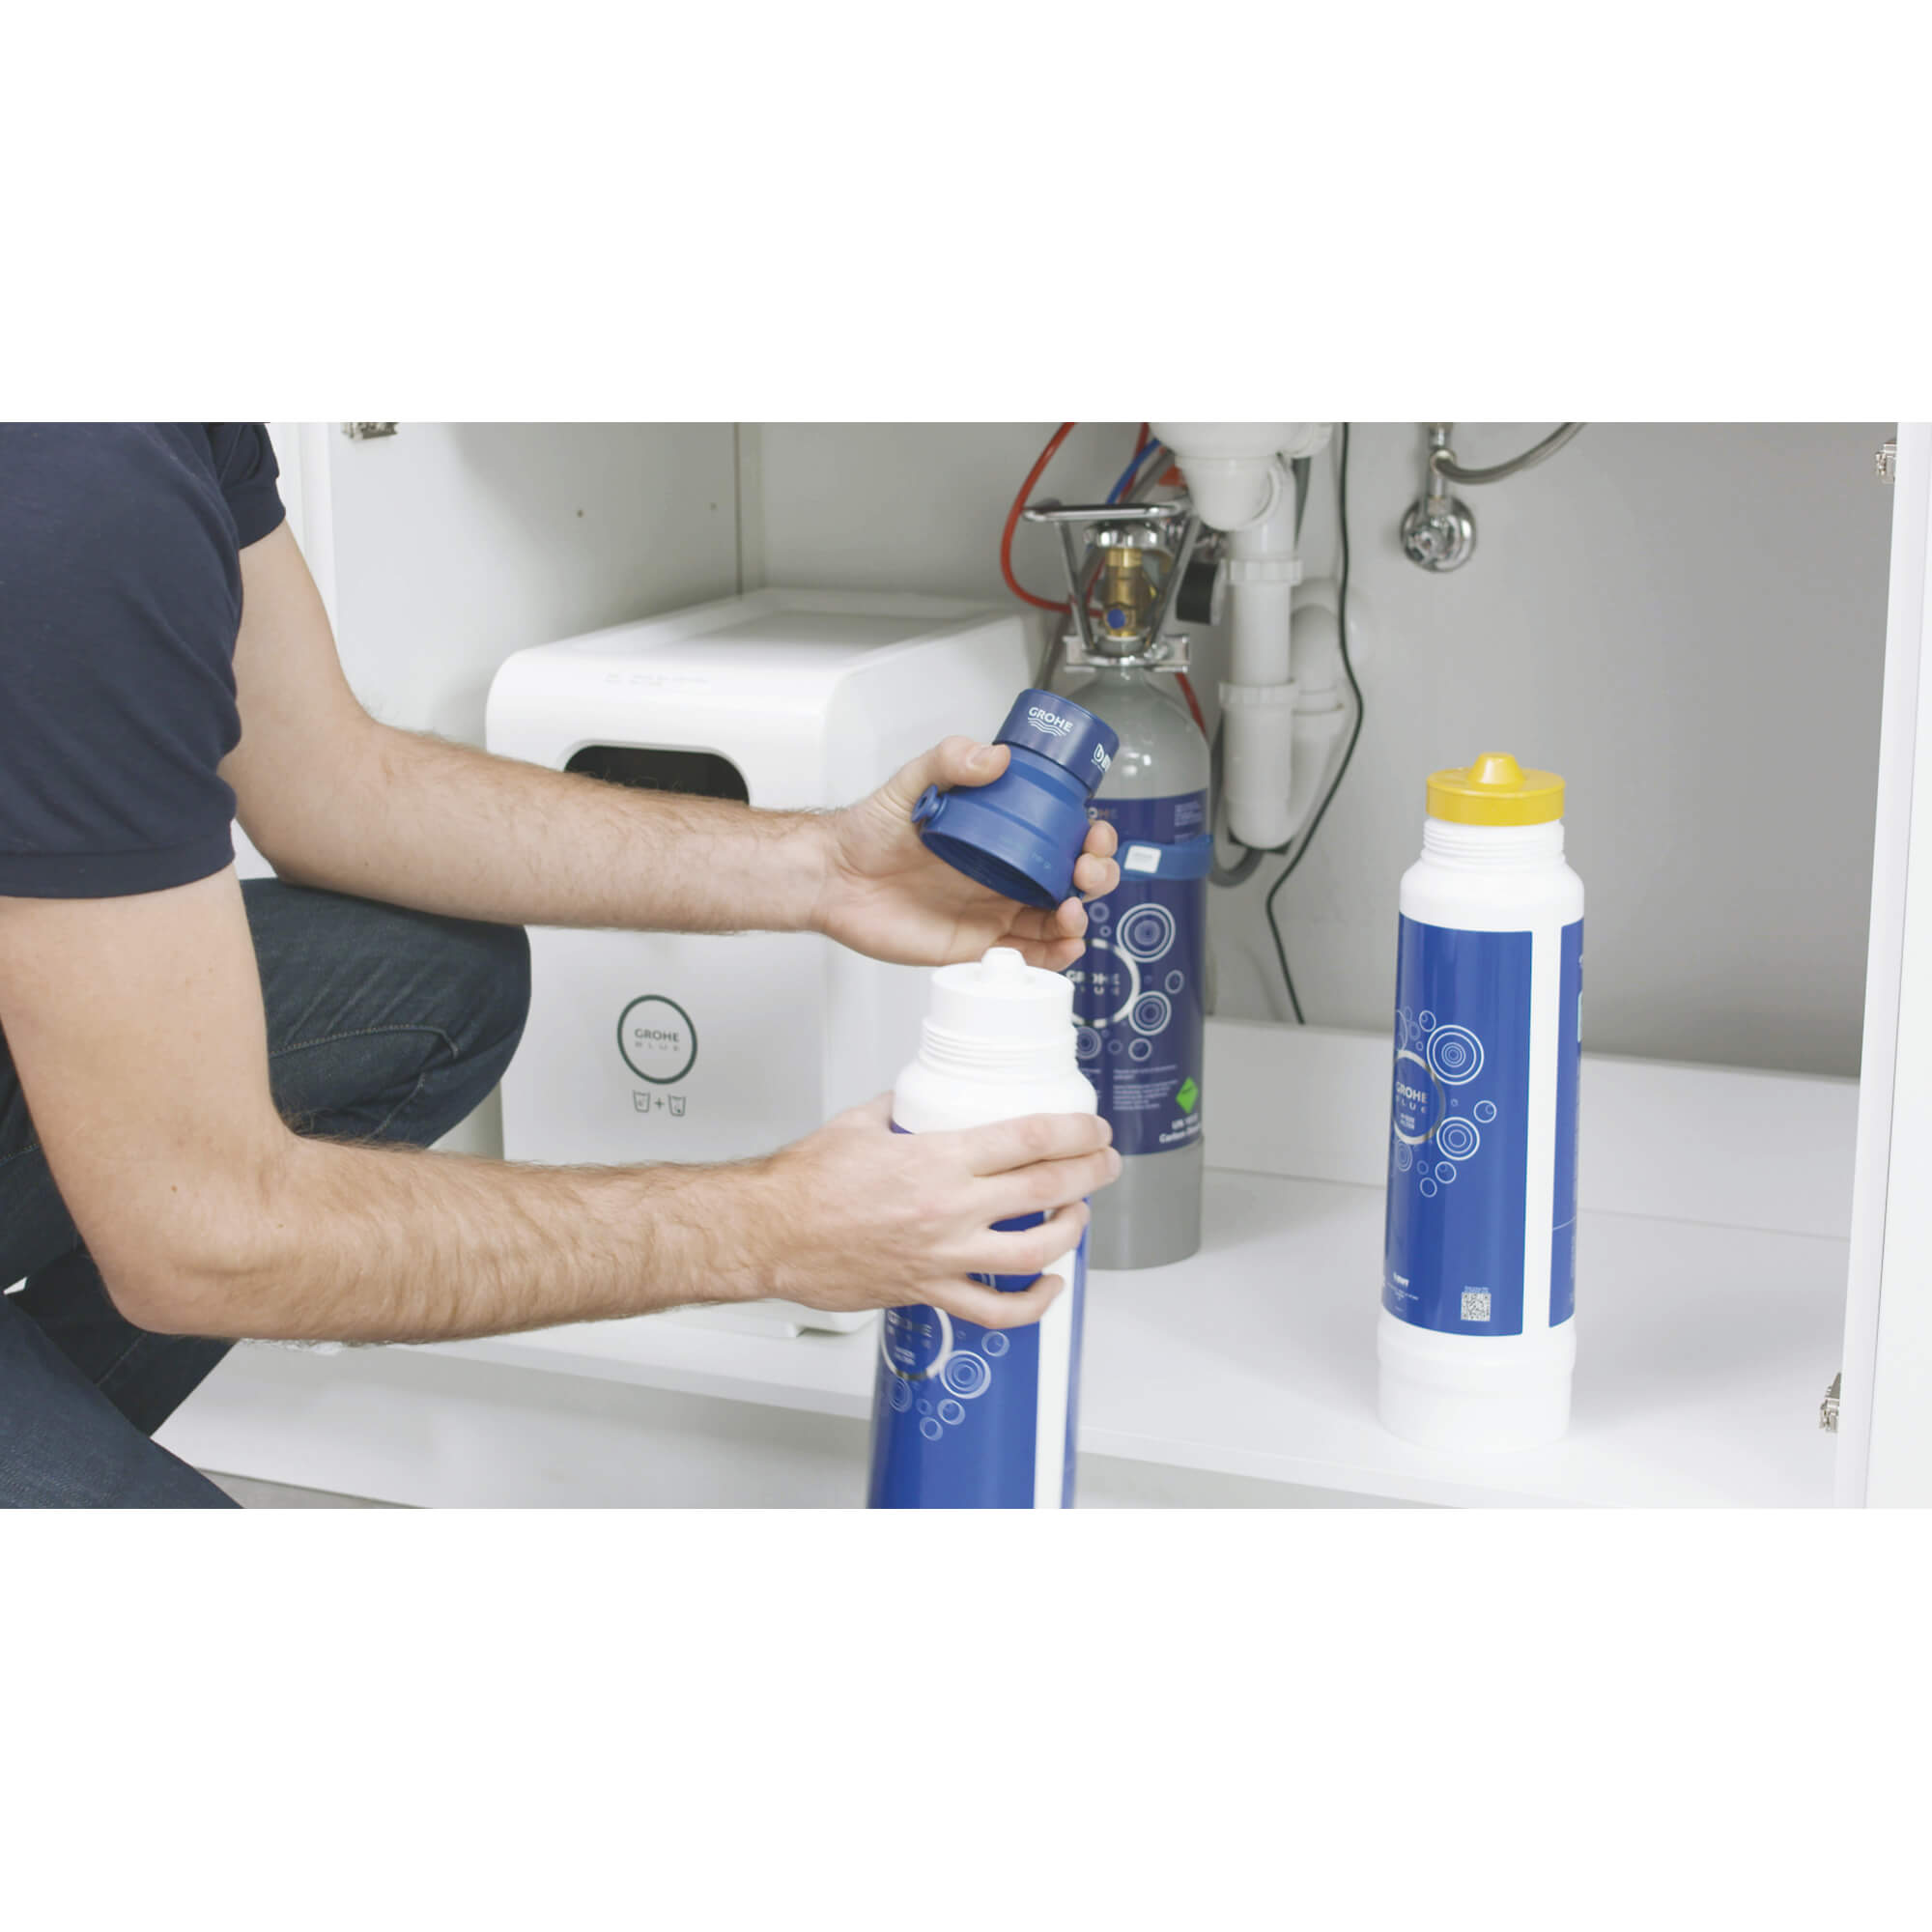 GROHE Blue® Magnesium Filter